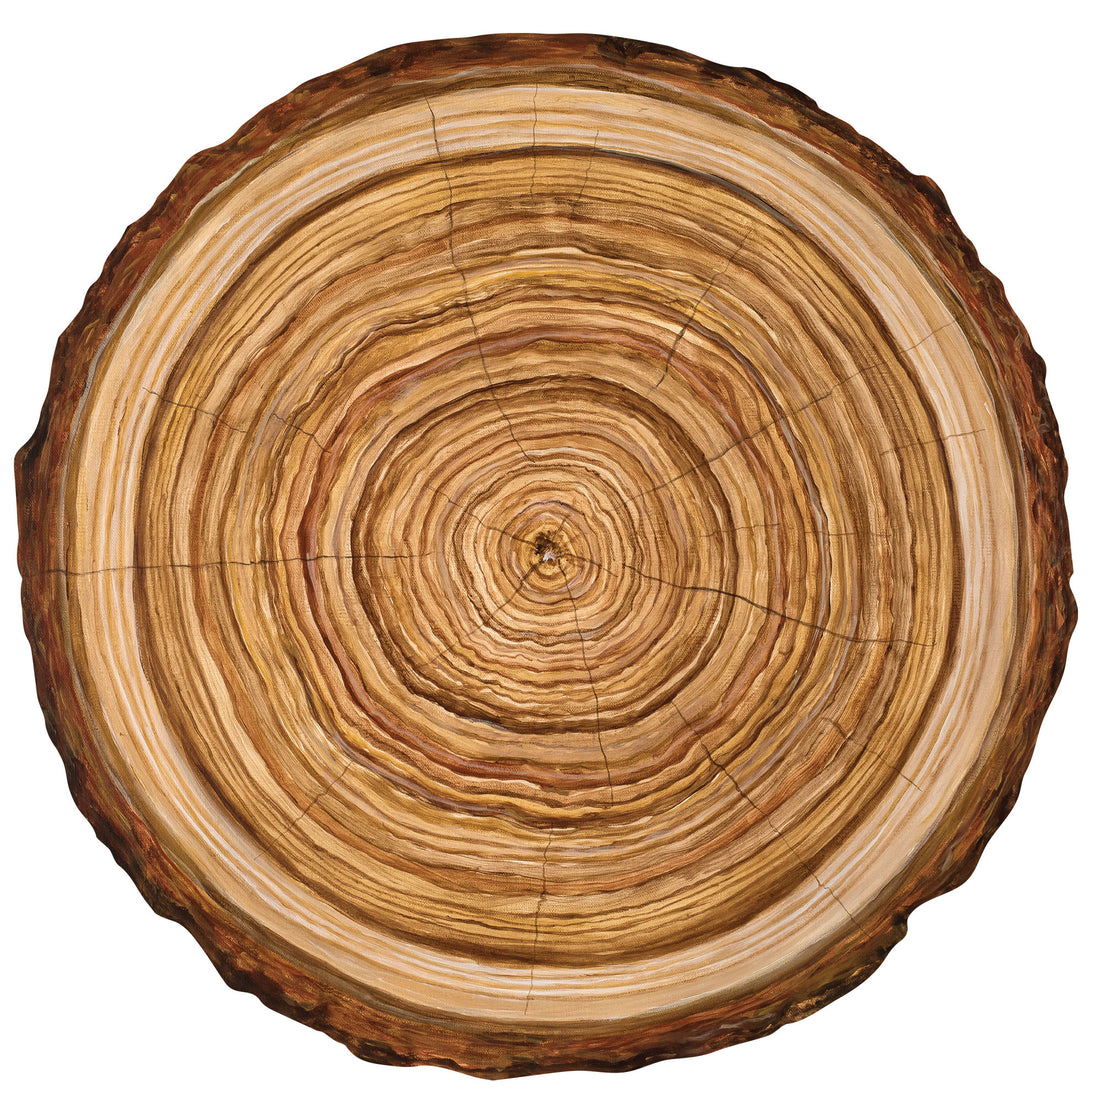 A circular die-cut illustration of the cross-section of a many-ringed tree with dark brown bark on the outer edge.